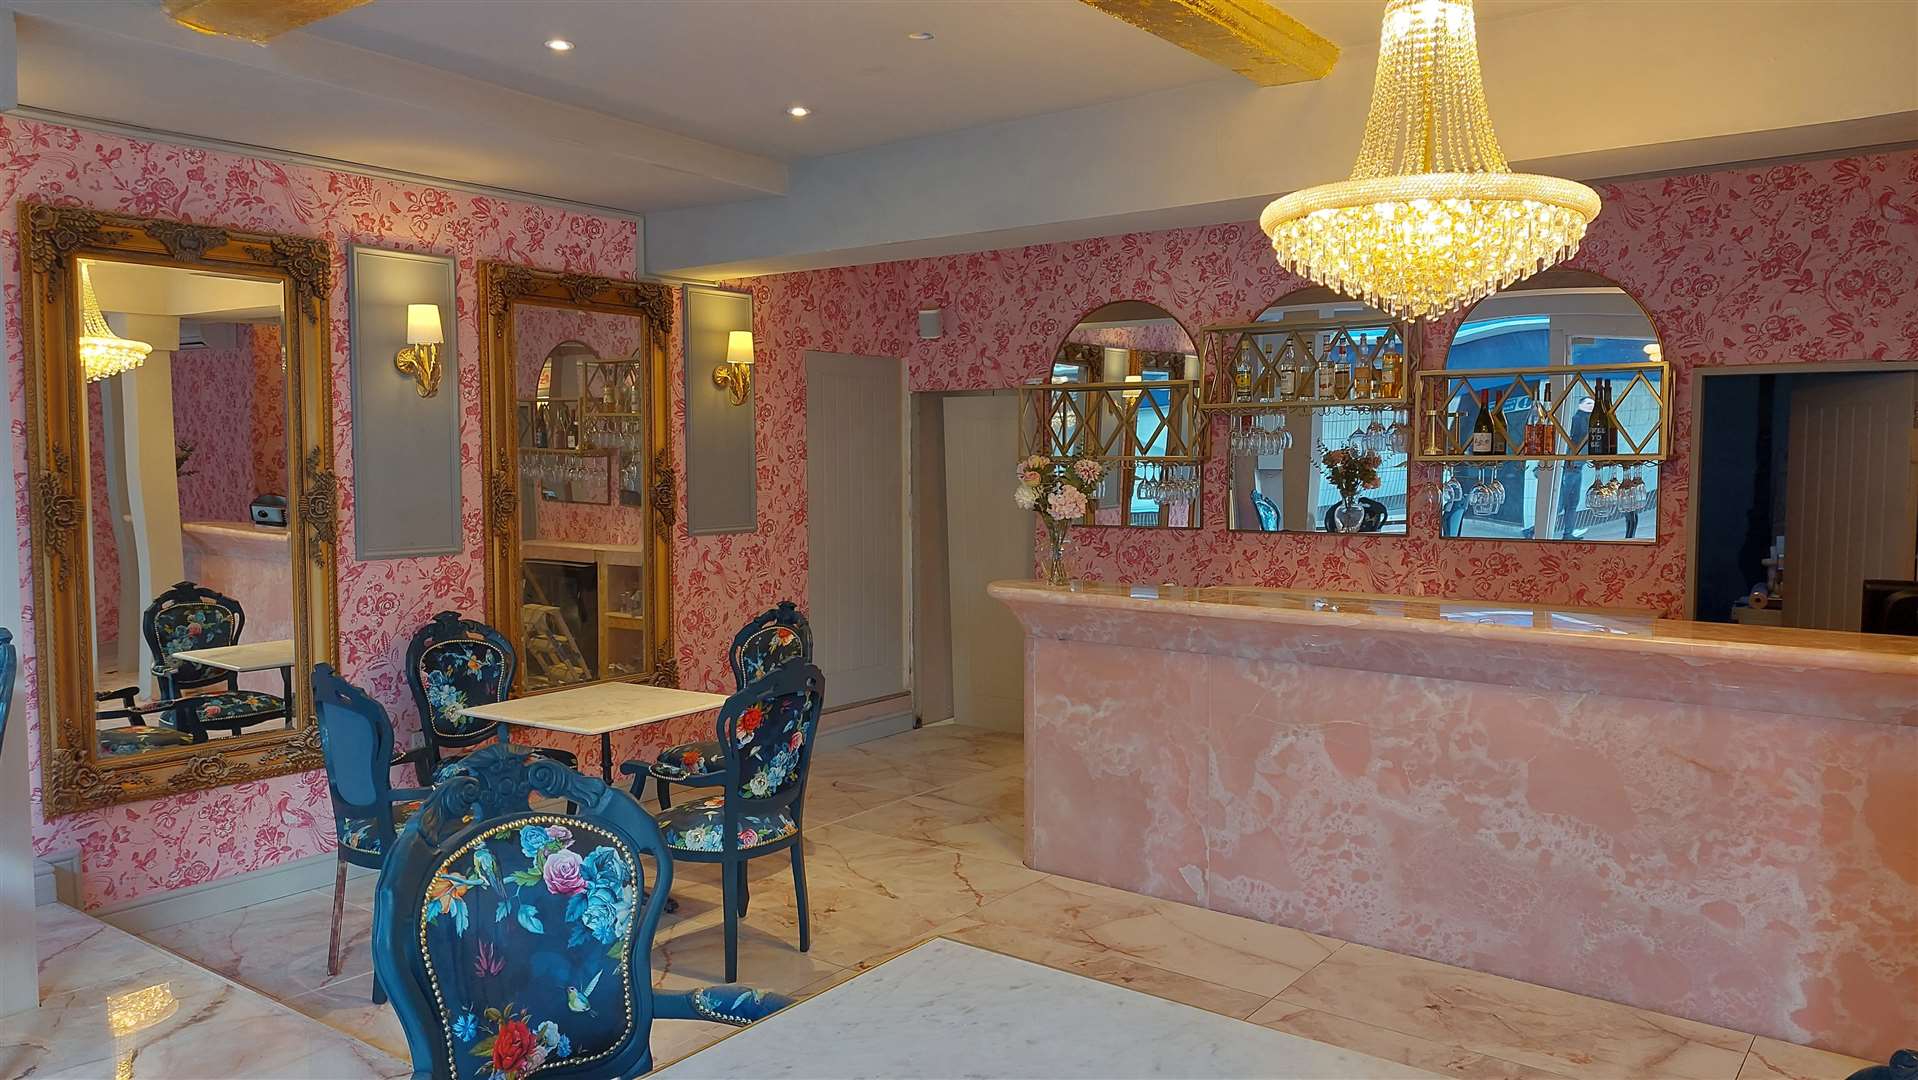 There is a pink bar and custom-made furniture